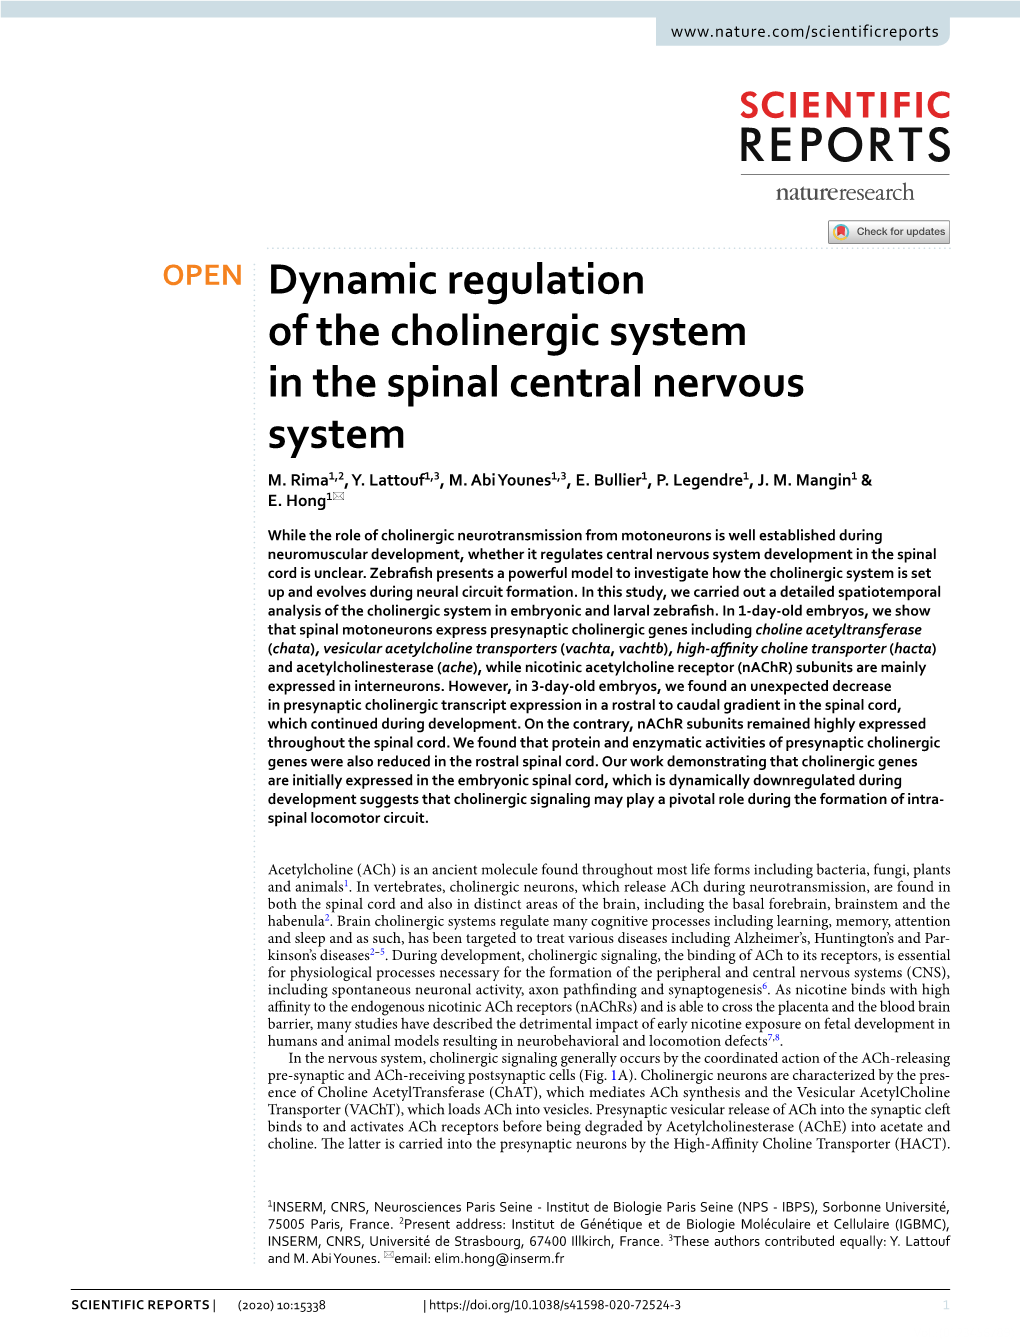 Dynamic Regulation of the Cholinergic System in the Spinal Central Nervous System M